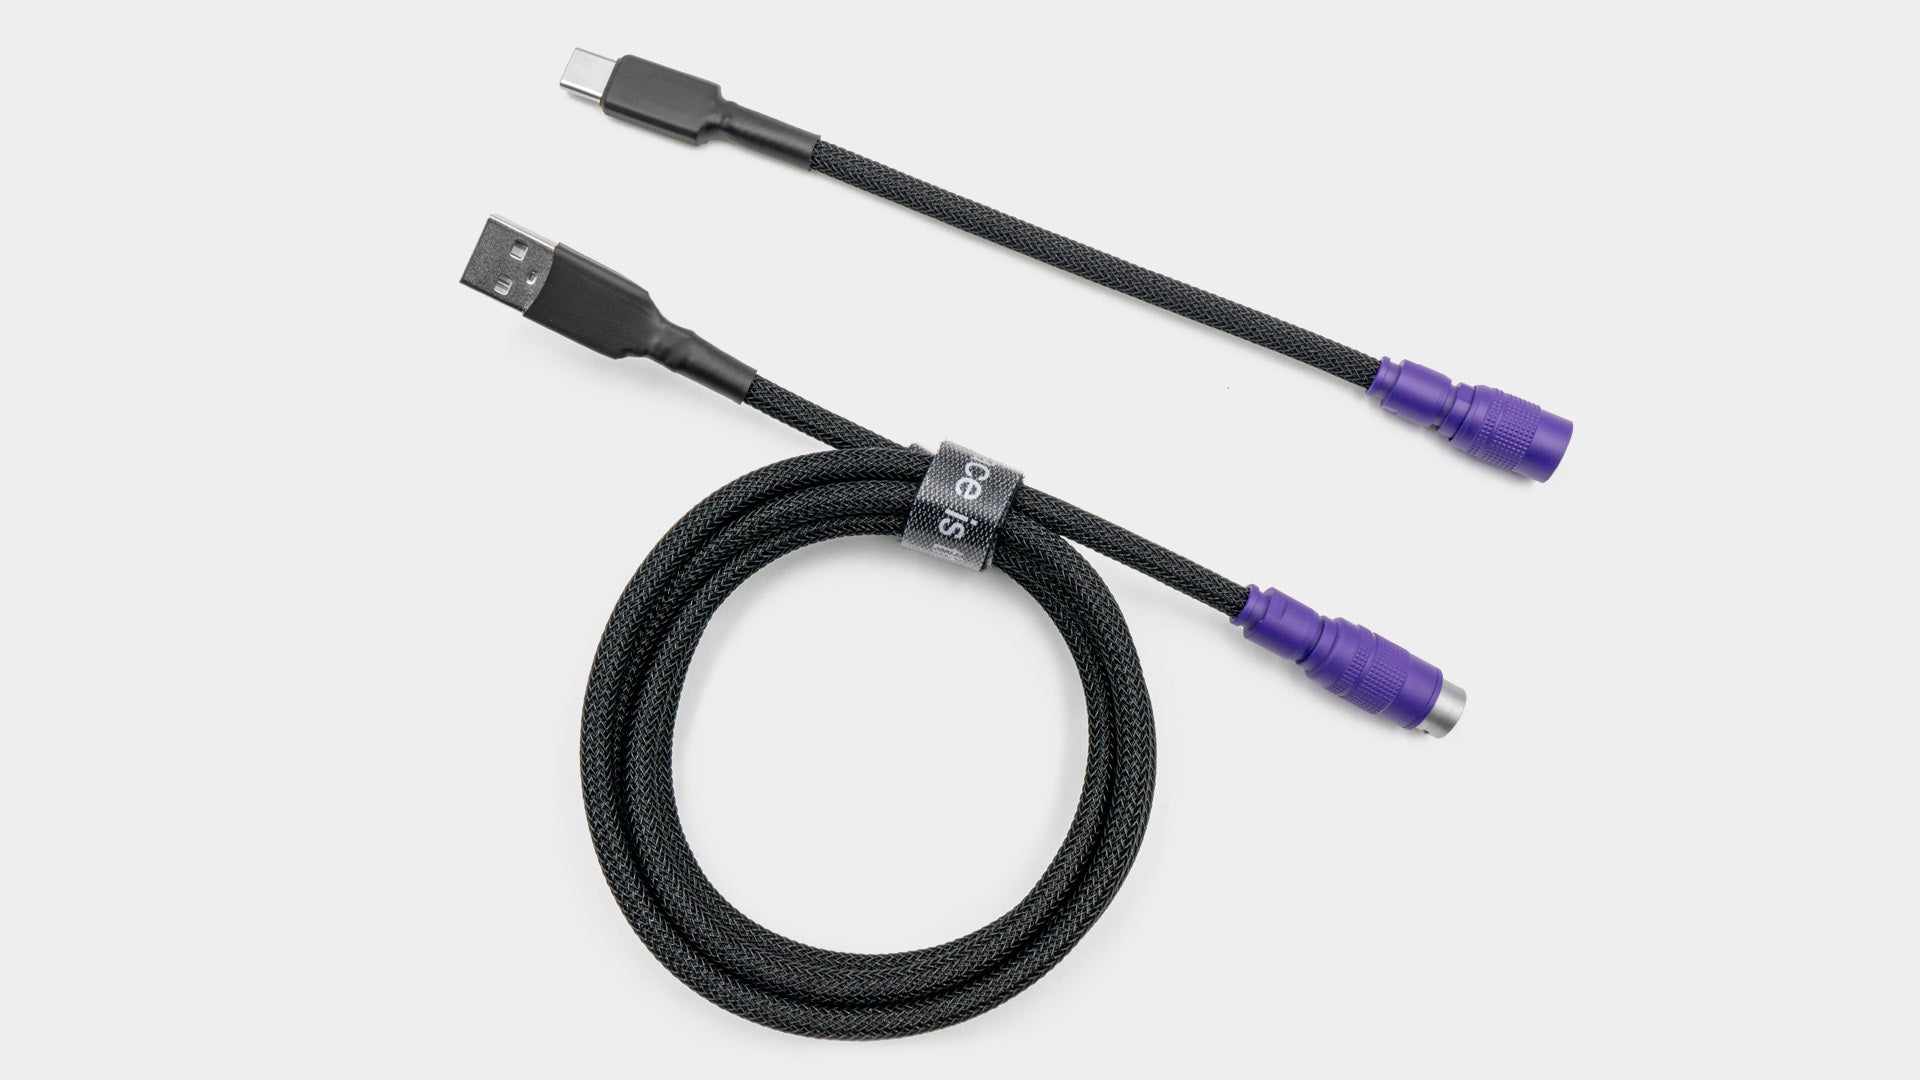 PURPLE NIGHT YC8 CABLE-Space Cables-coiled keyboard cable-coiled usb c cable-coiled cable keyboard